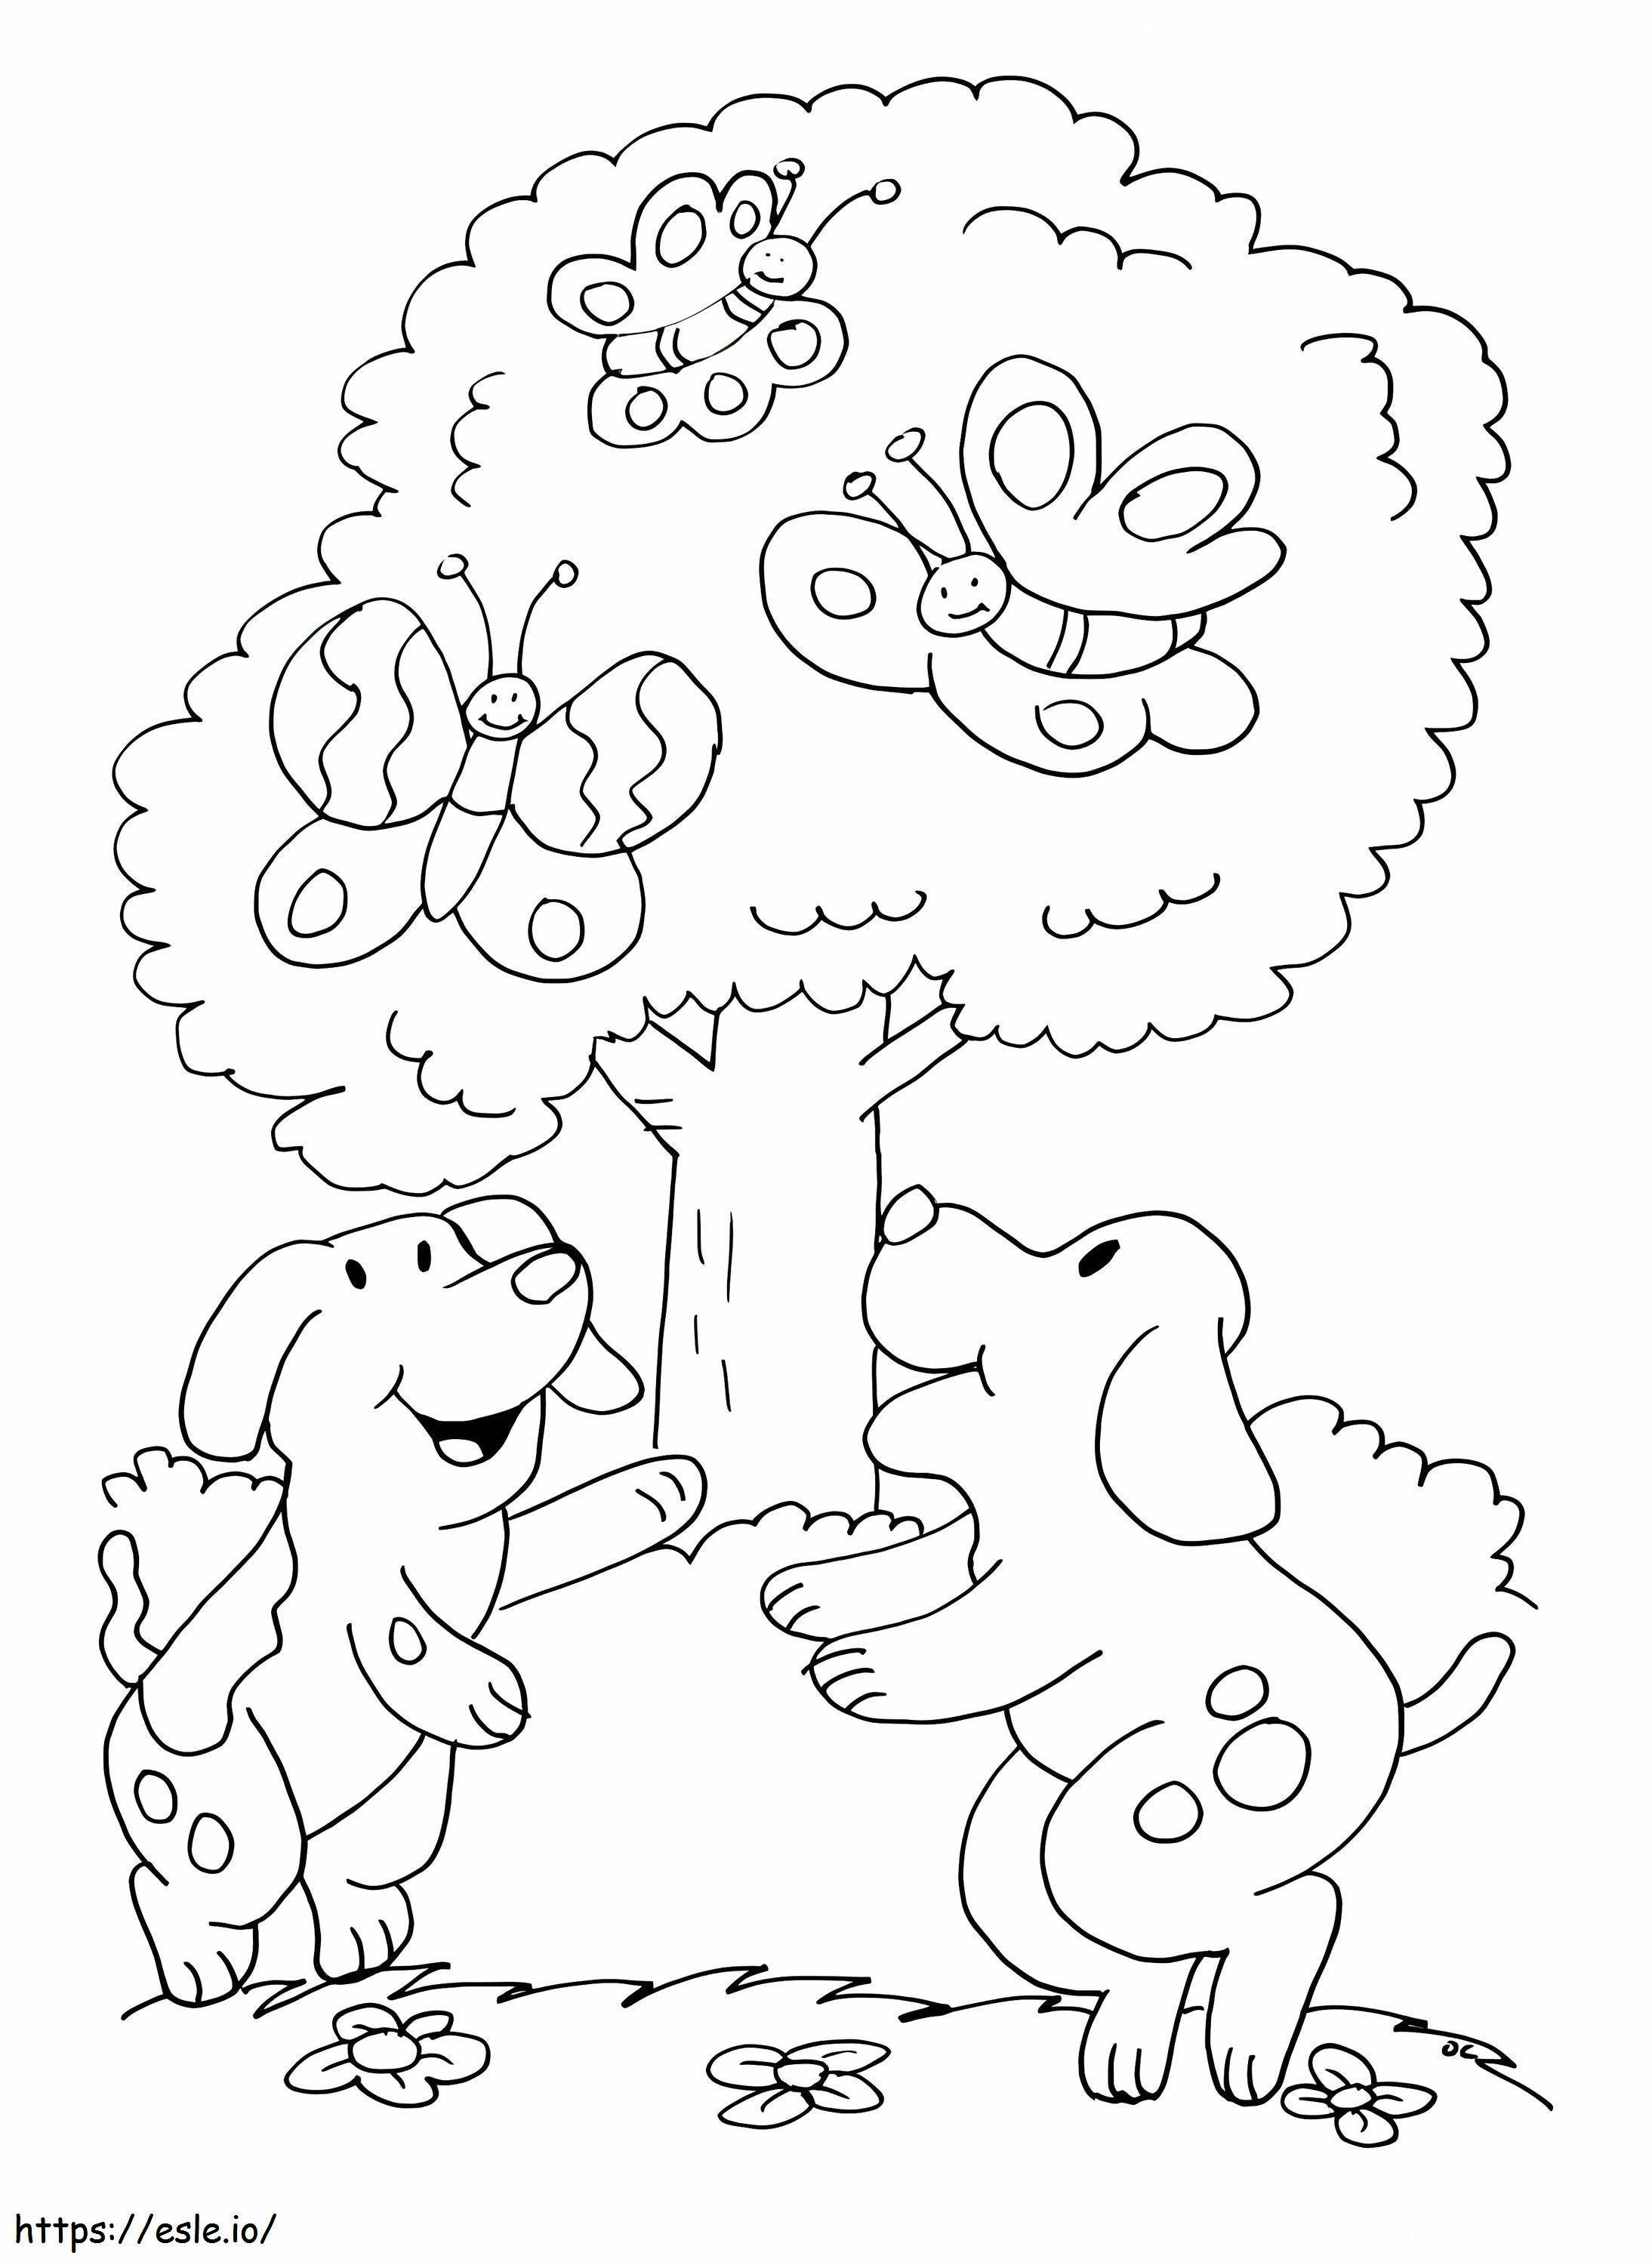 Pet Dogs coloring page